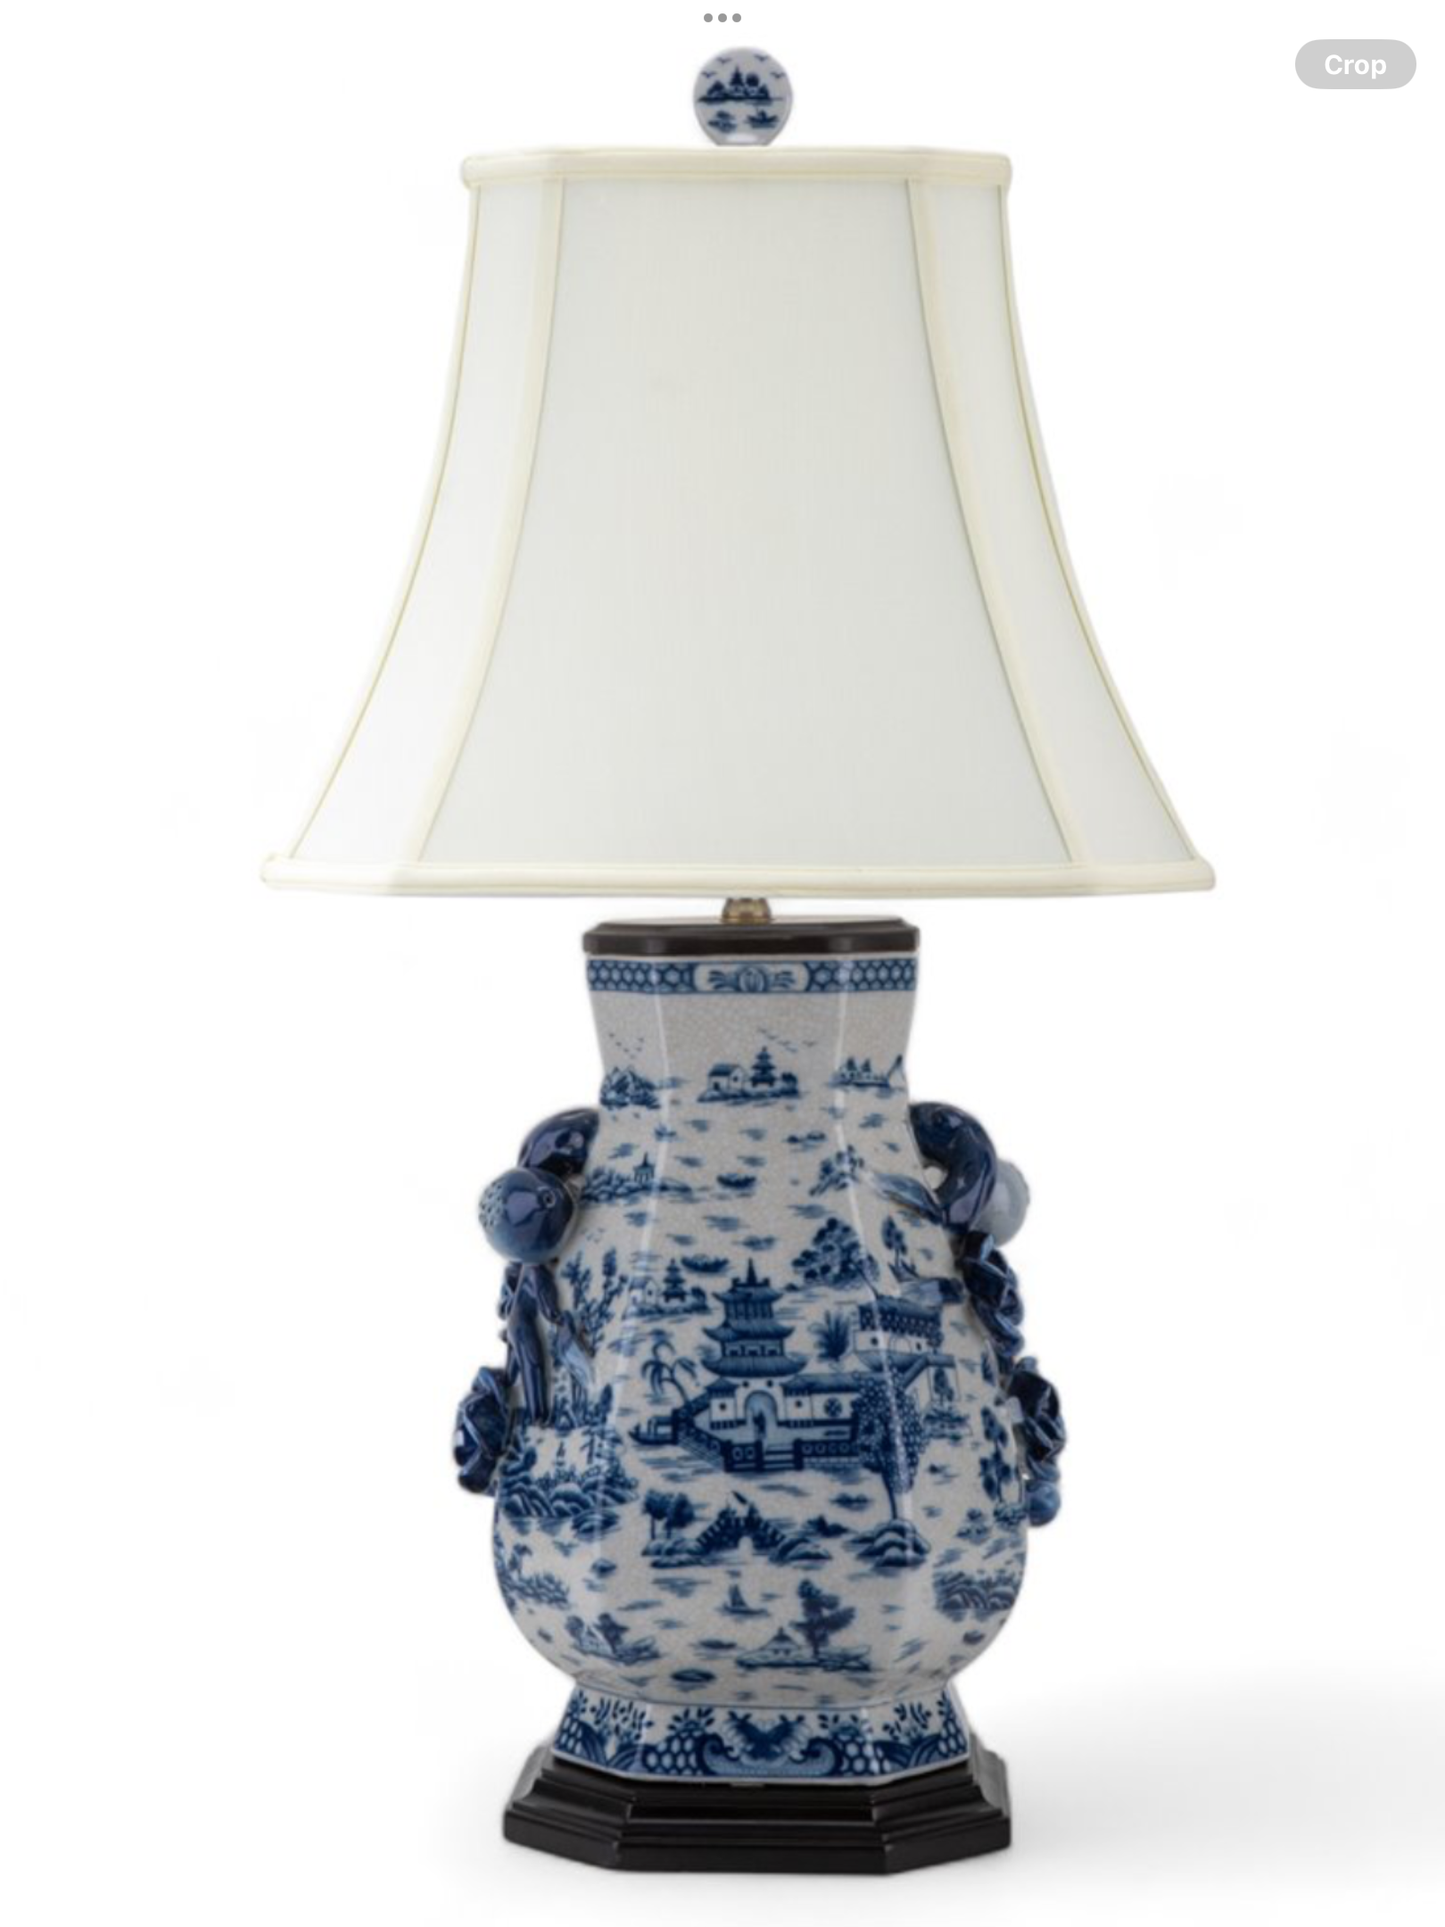 Blue Willow Pottery Lamp